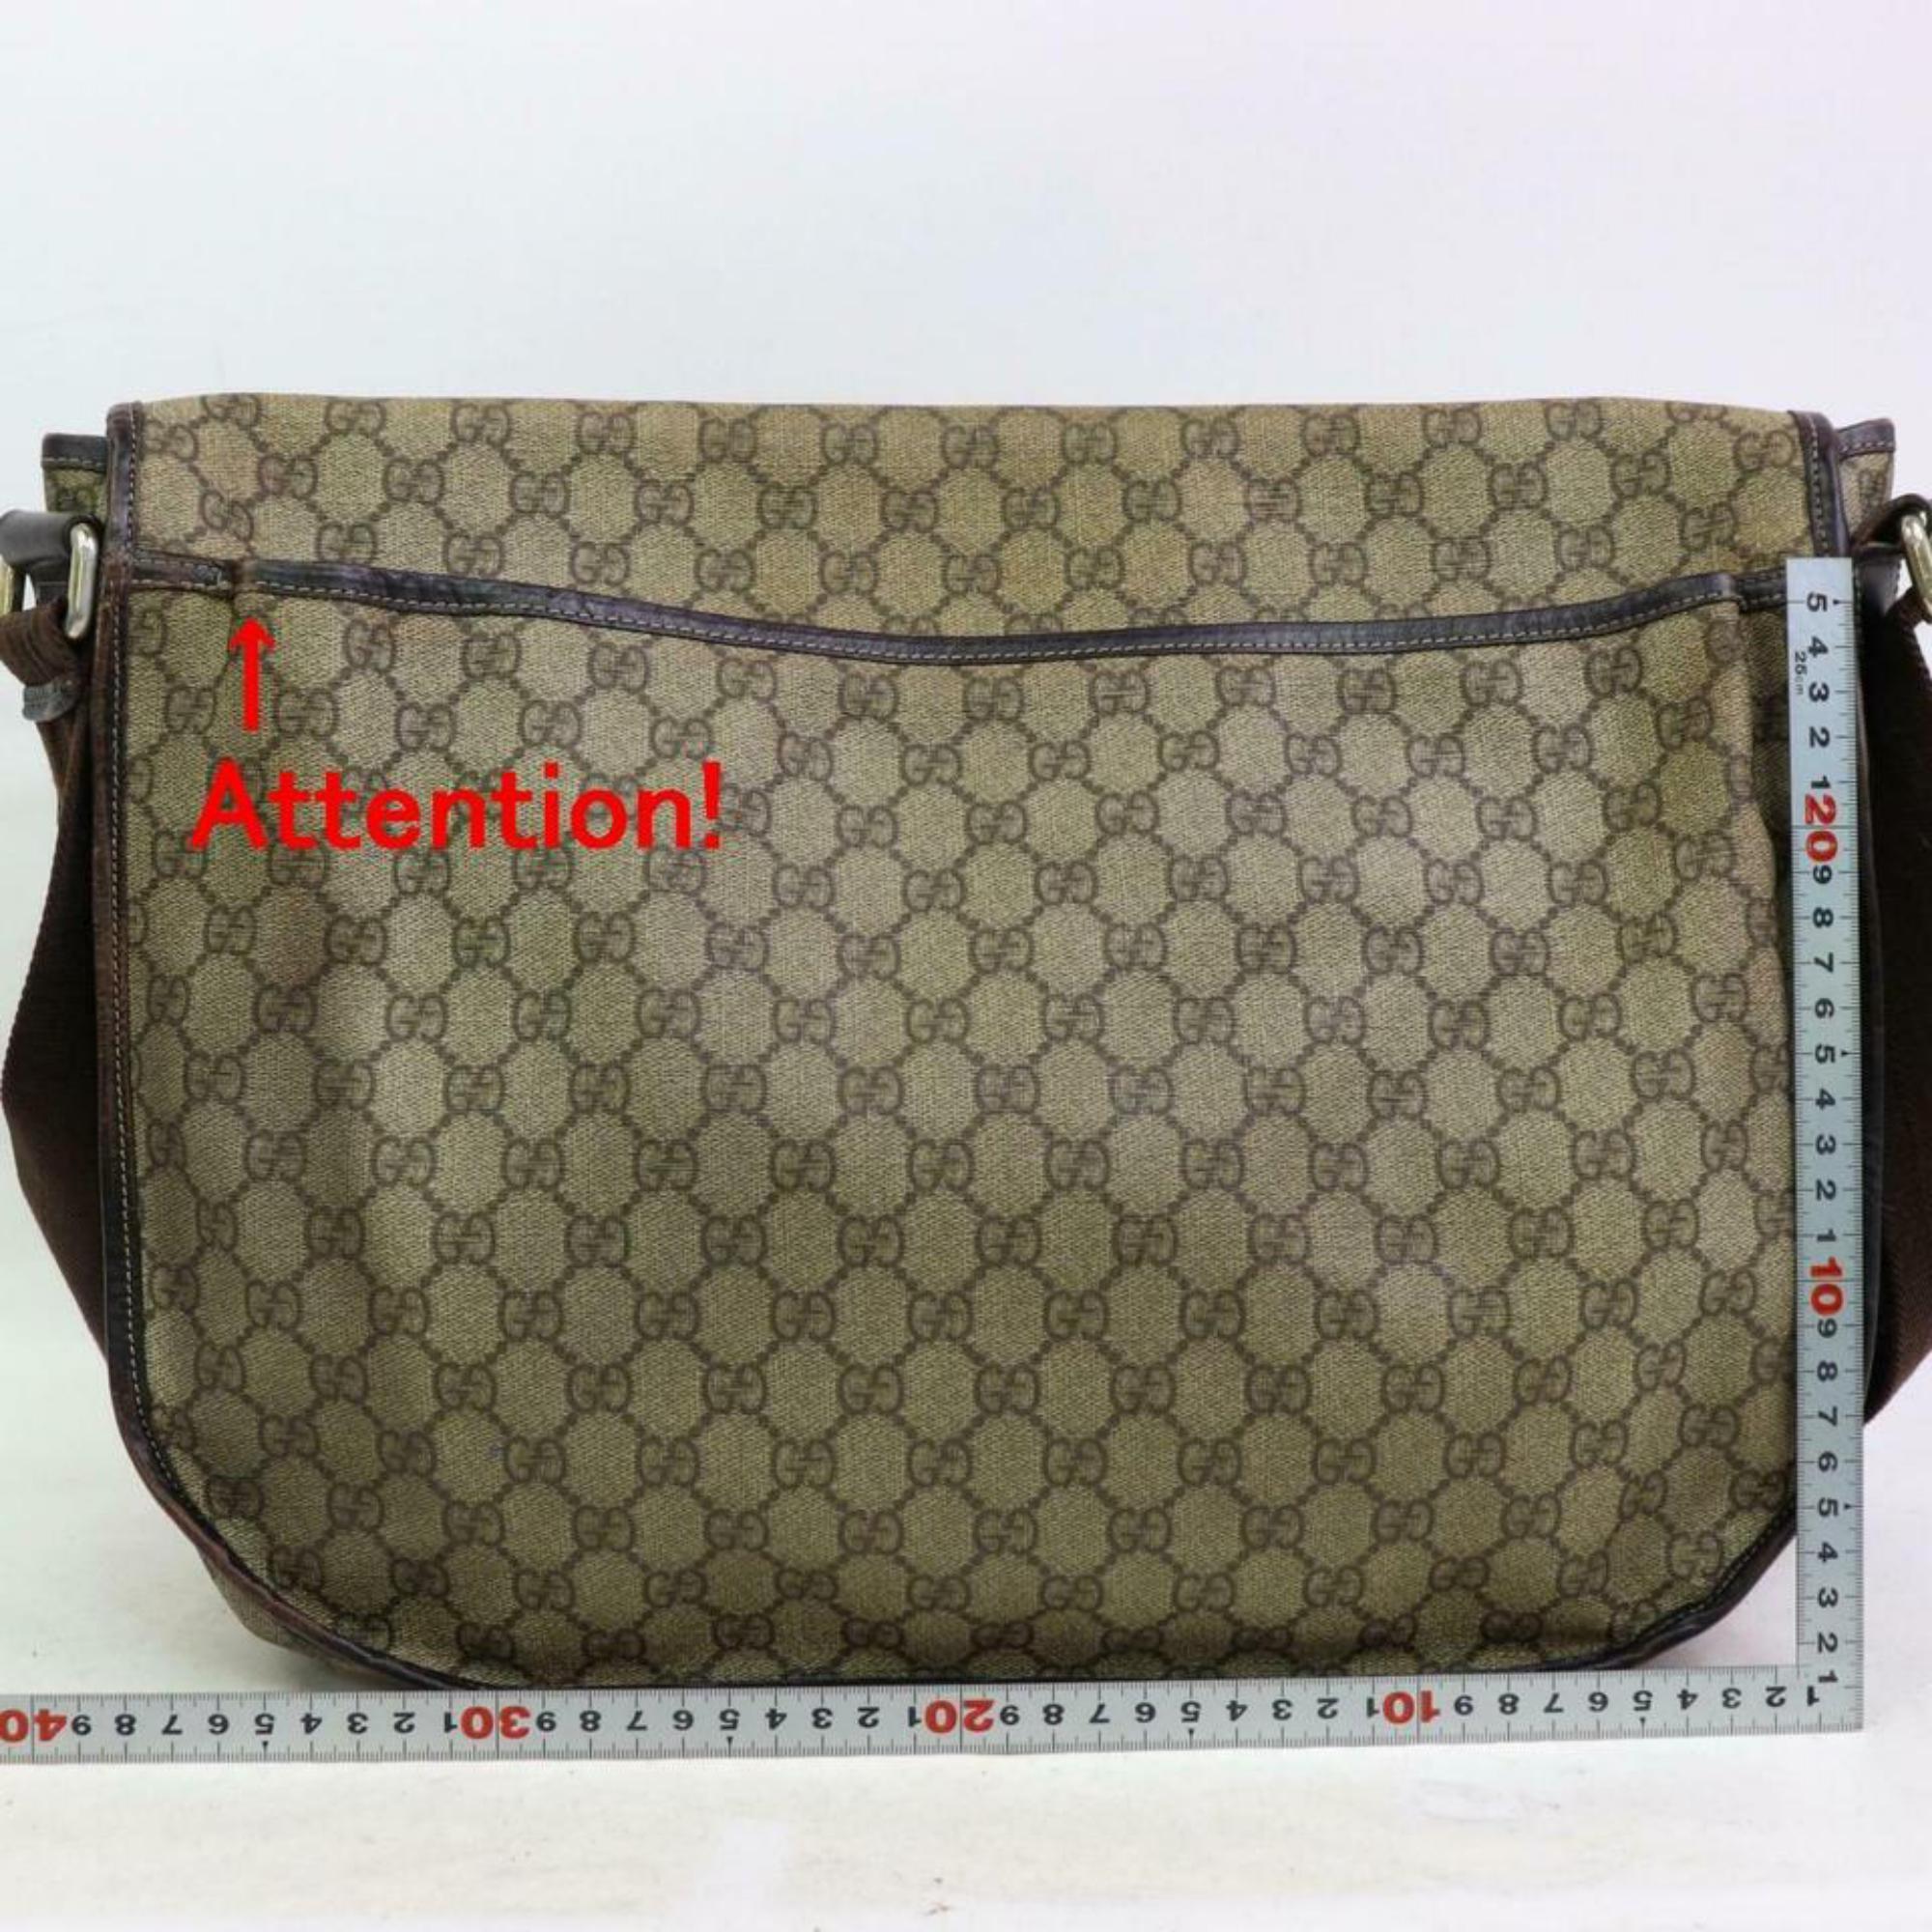 Gucci Supreme Gg Monogram Flap Messenger 870368 Brown Coated Canvas Shoulder Bag In Good Condition For Sale In Forest Hills, NY